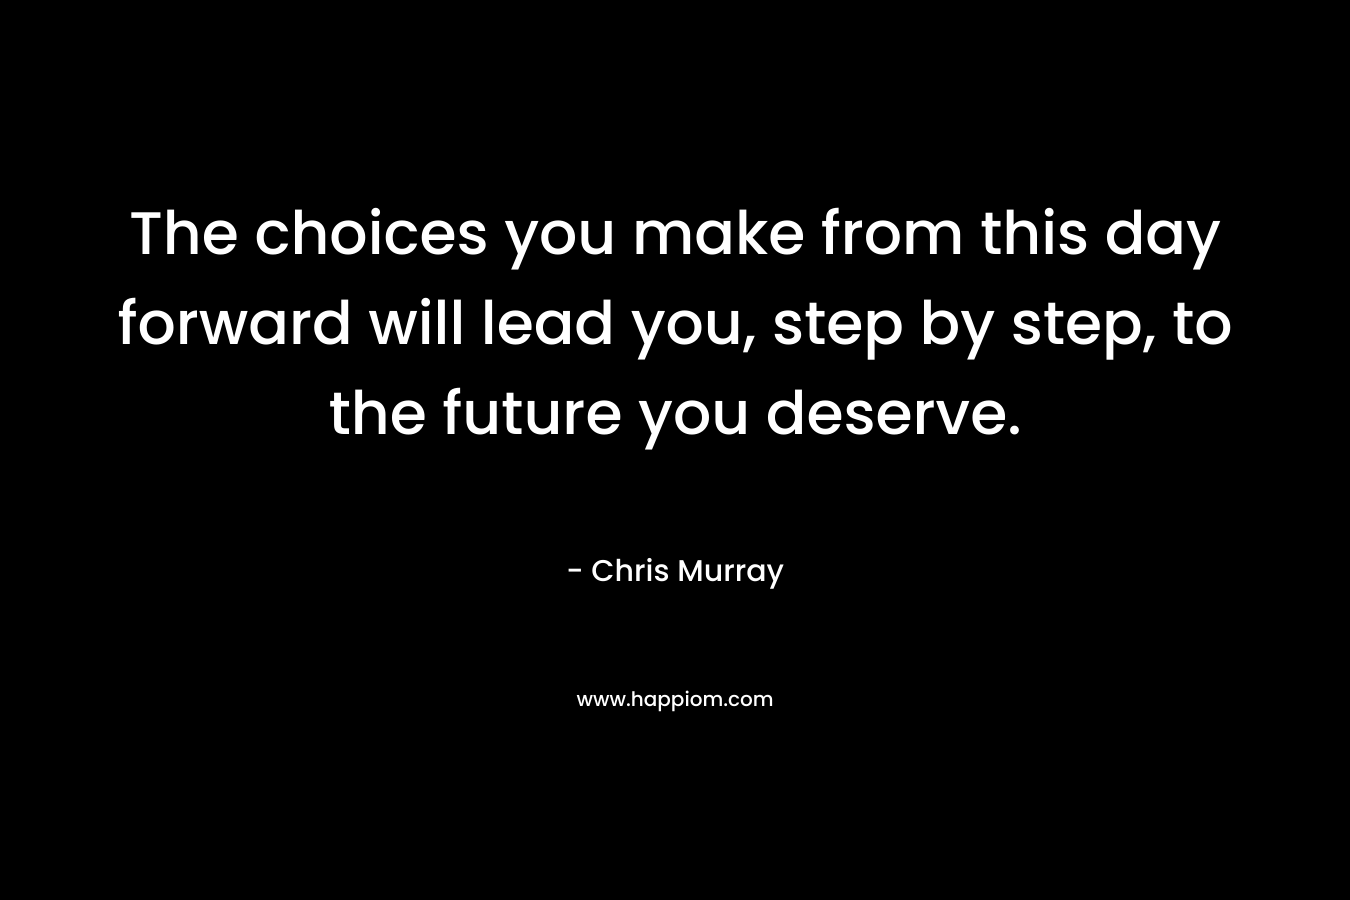 The choices you make from this day forward will lead you, step by step, to the future you deserve.